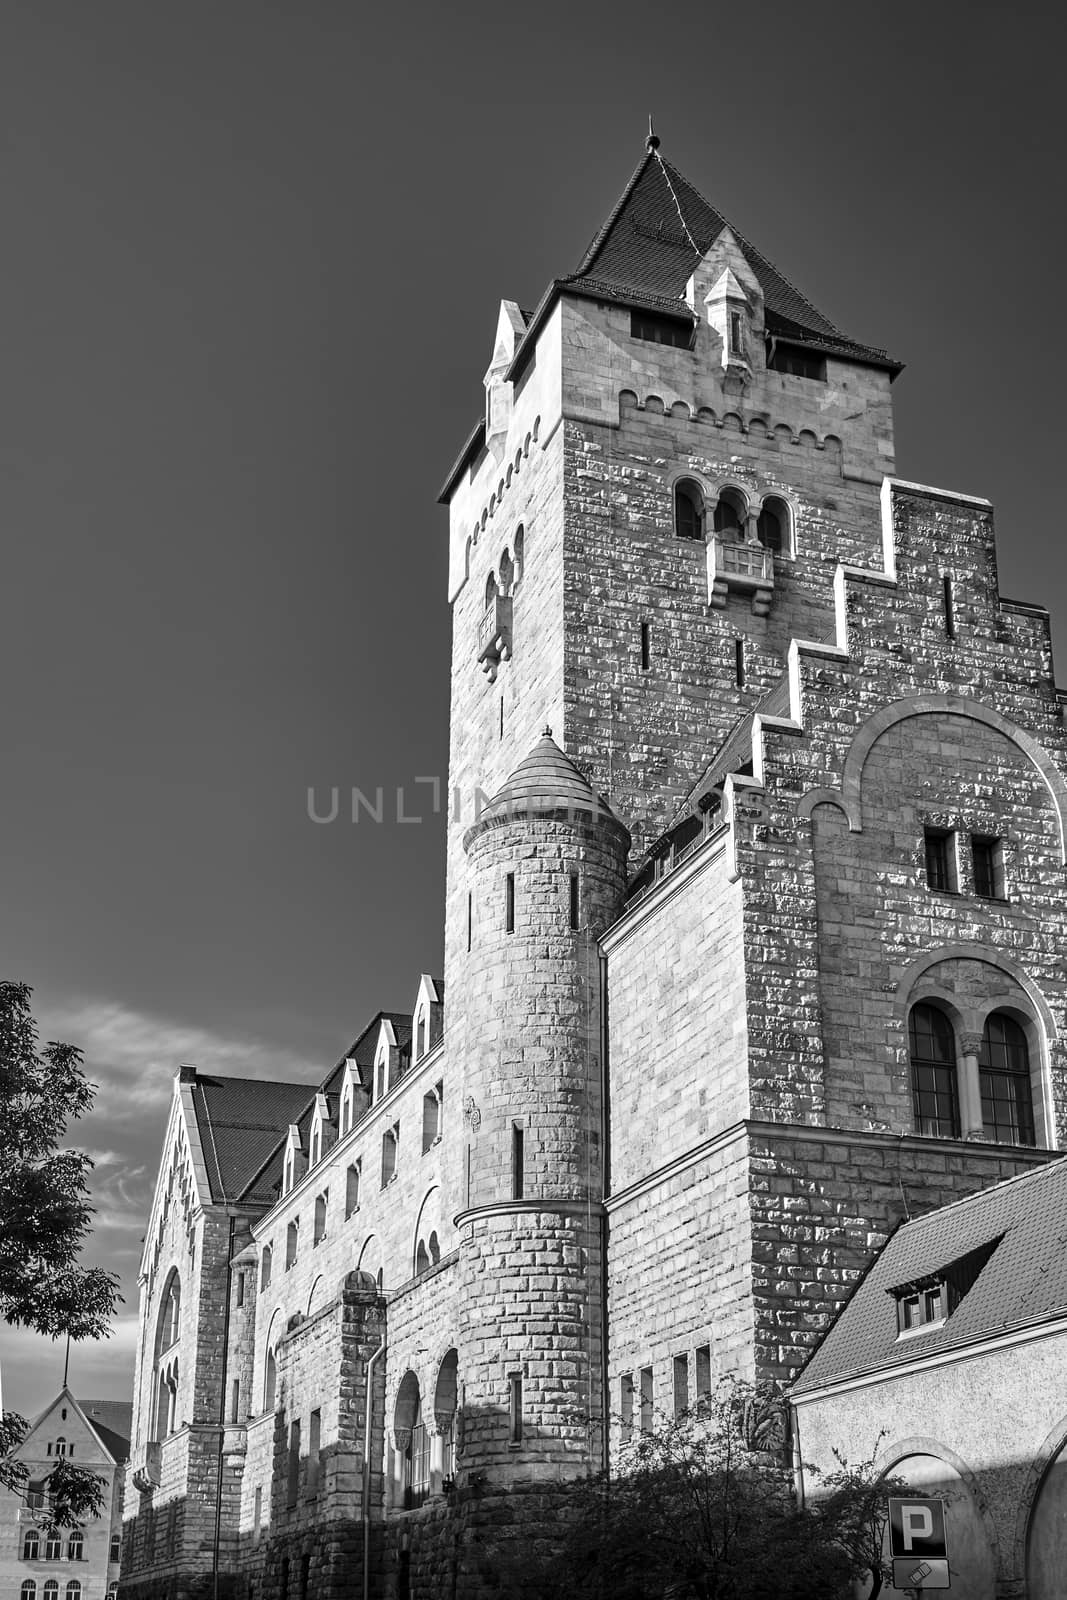 Historic tower of Stone Imperial castle in Poznan, black and white